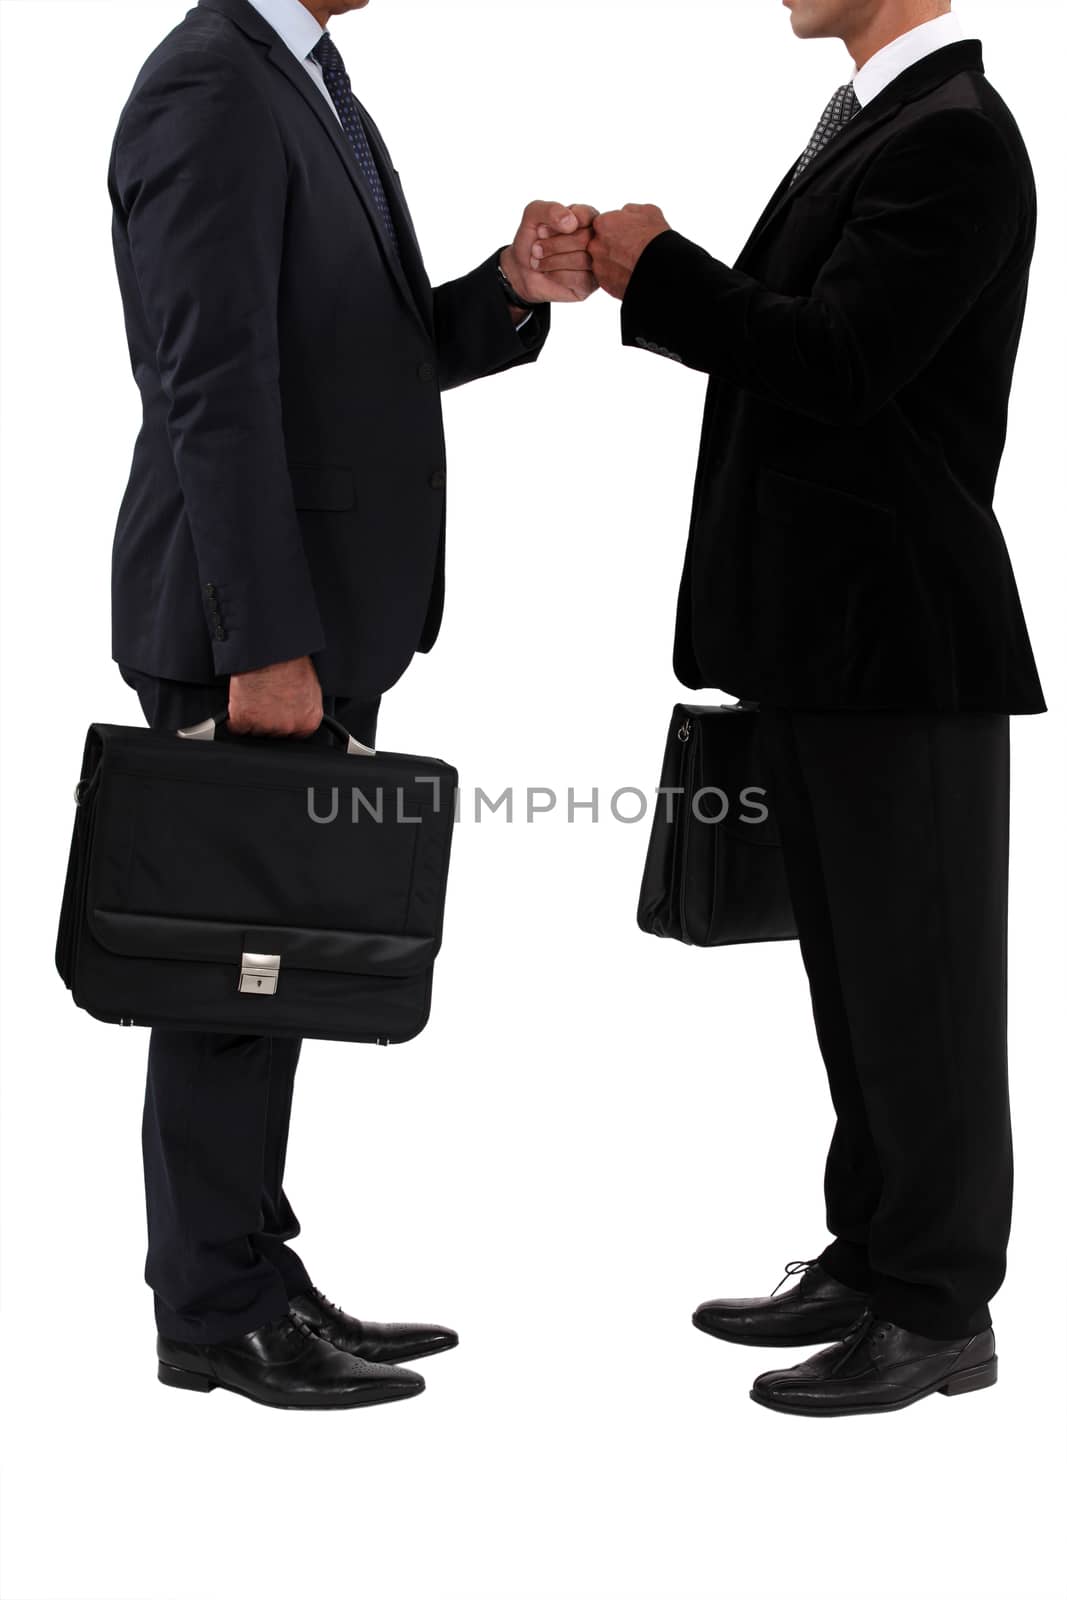 Two businessmen bumping fists